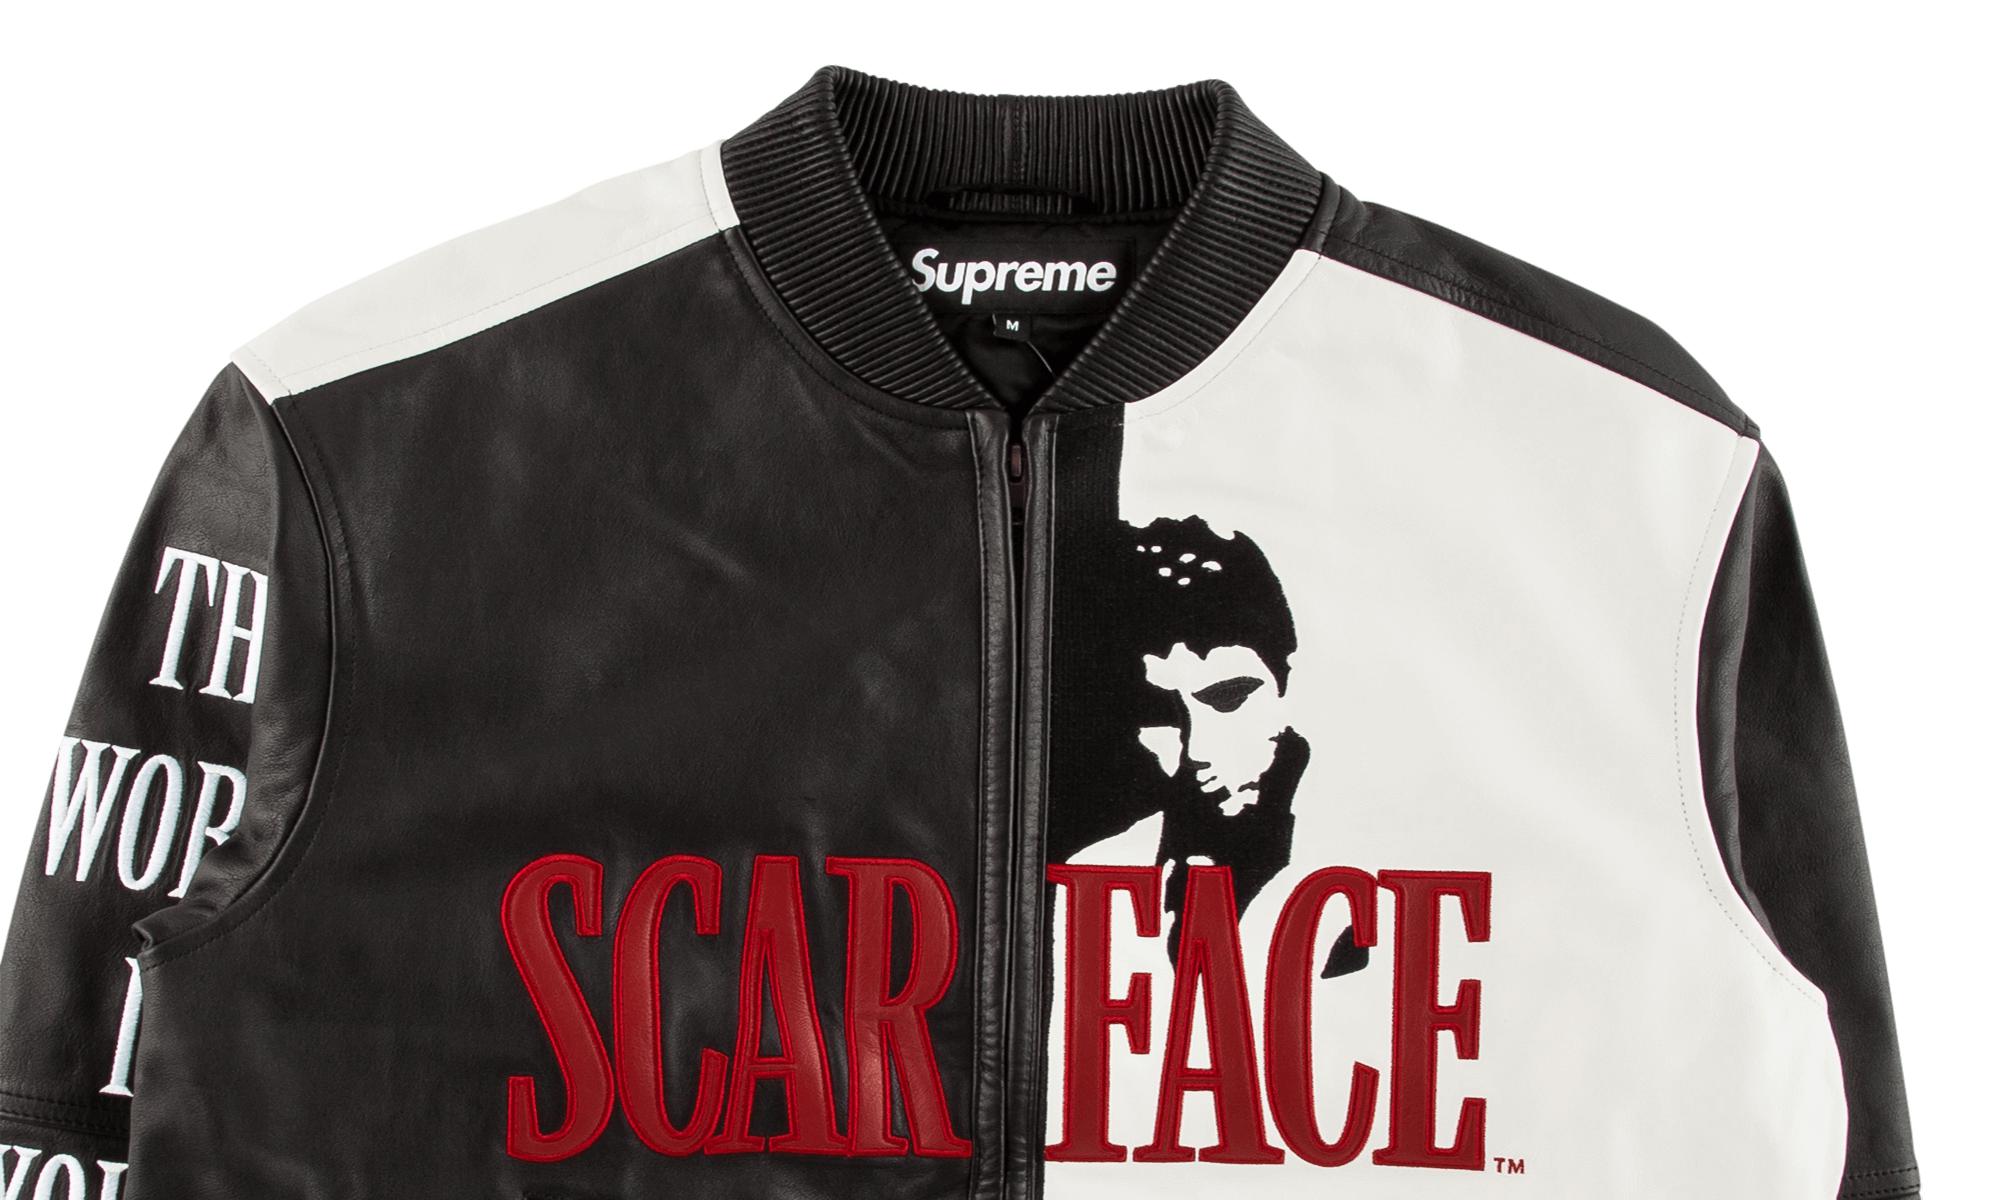 Supreme Scarface Embroidered Leather Jacket Black for Men - Lyst